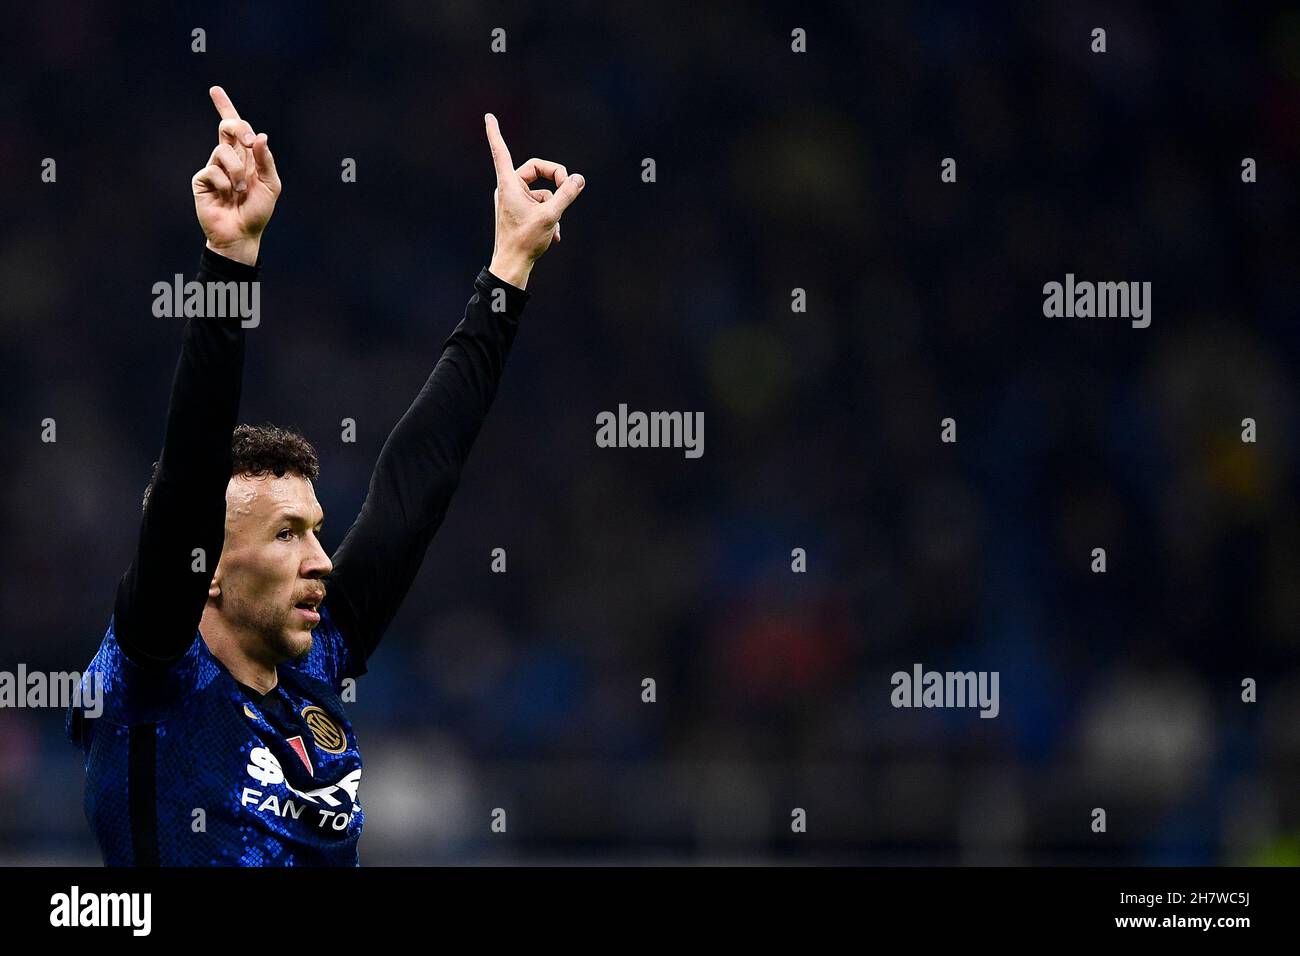 Milan, Italy. 24 November 2021. Ivan Perisic of FC Internazionale gestures during the UEFA Champions League football match between FC Internazionale and FC Shakhtar Donetsk. Credit: Nicolò Campo/Alamy Live News Stock Photo